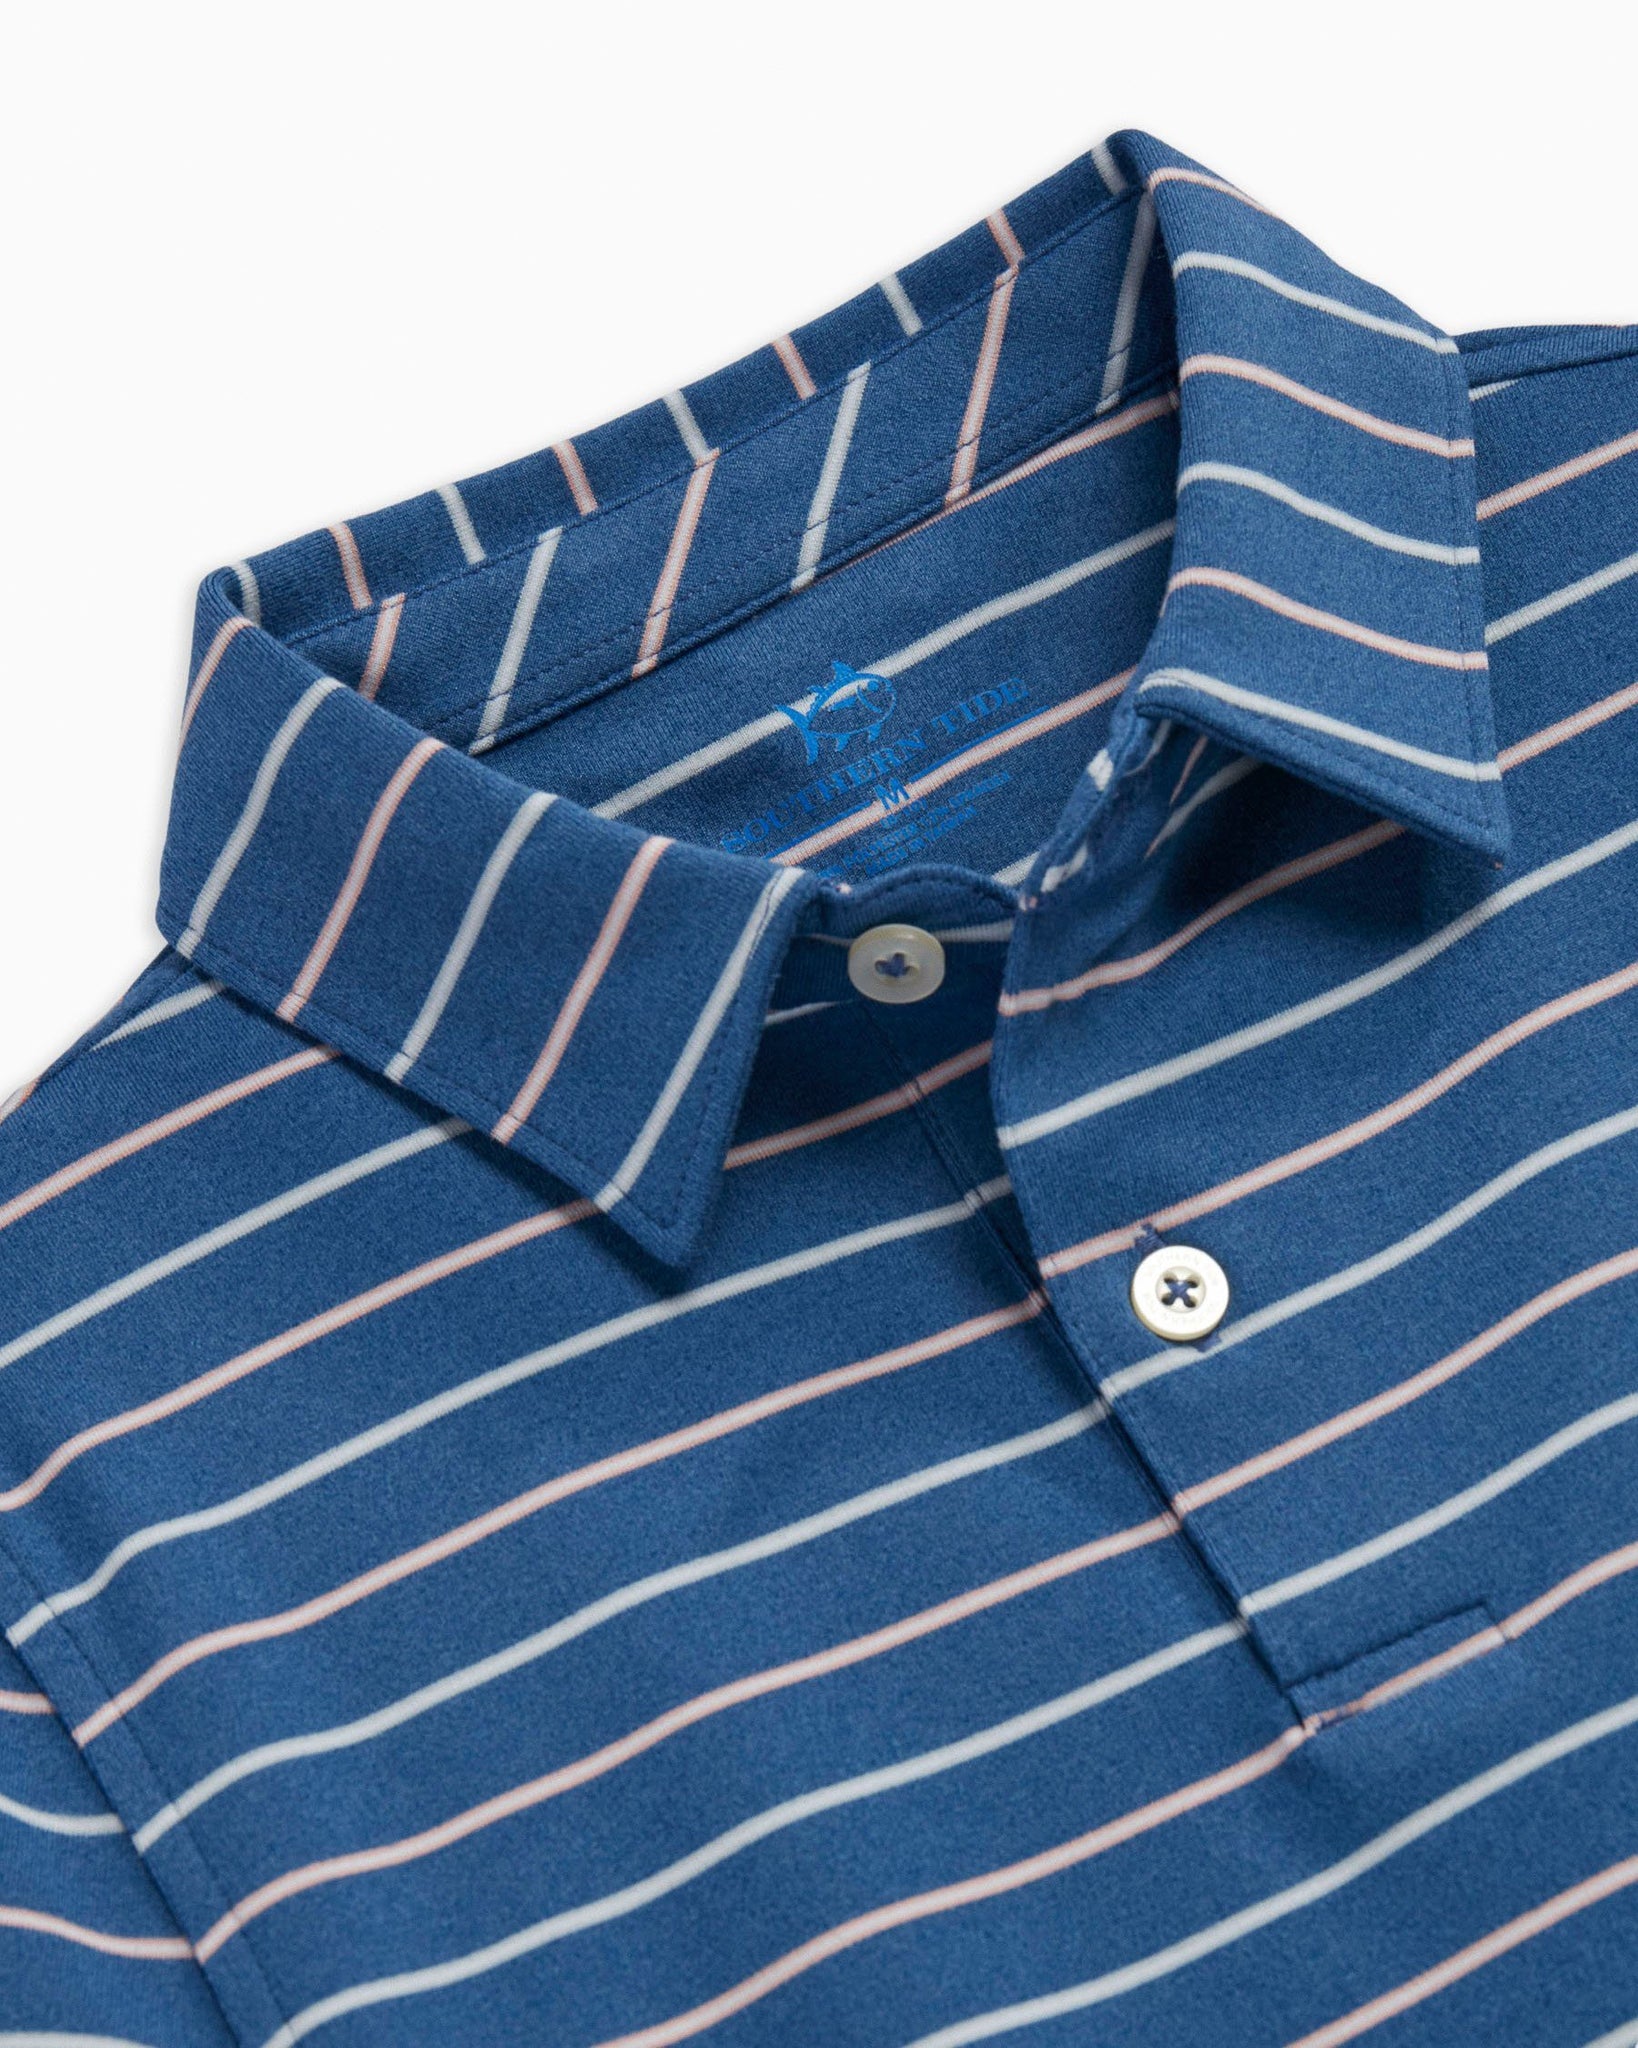 The detail of the Boys Breaker Ryder Stripe Performance Polo by Southern Tide - Heather Seven Seas Blue